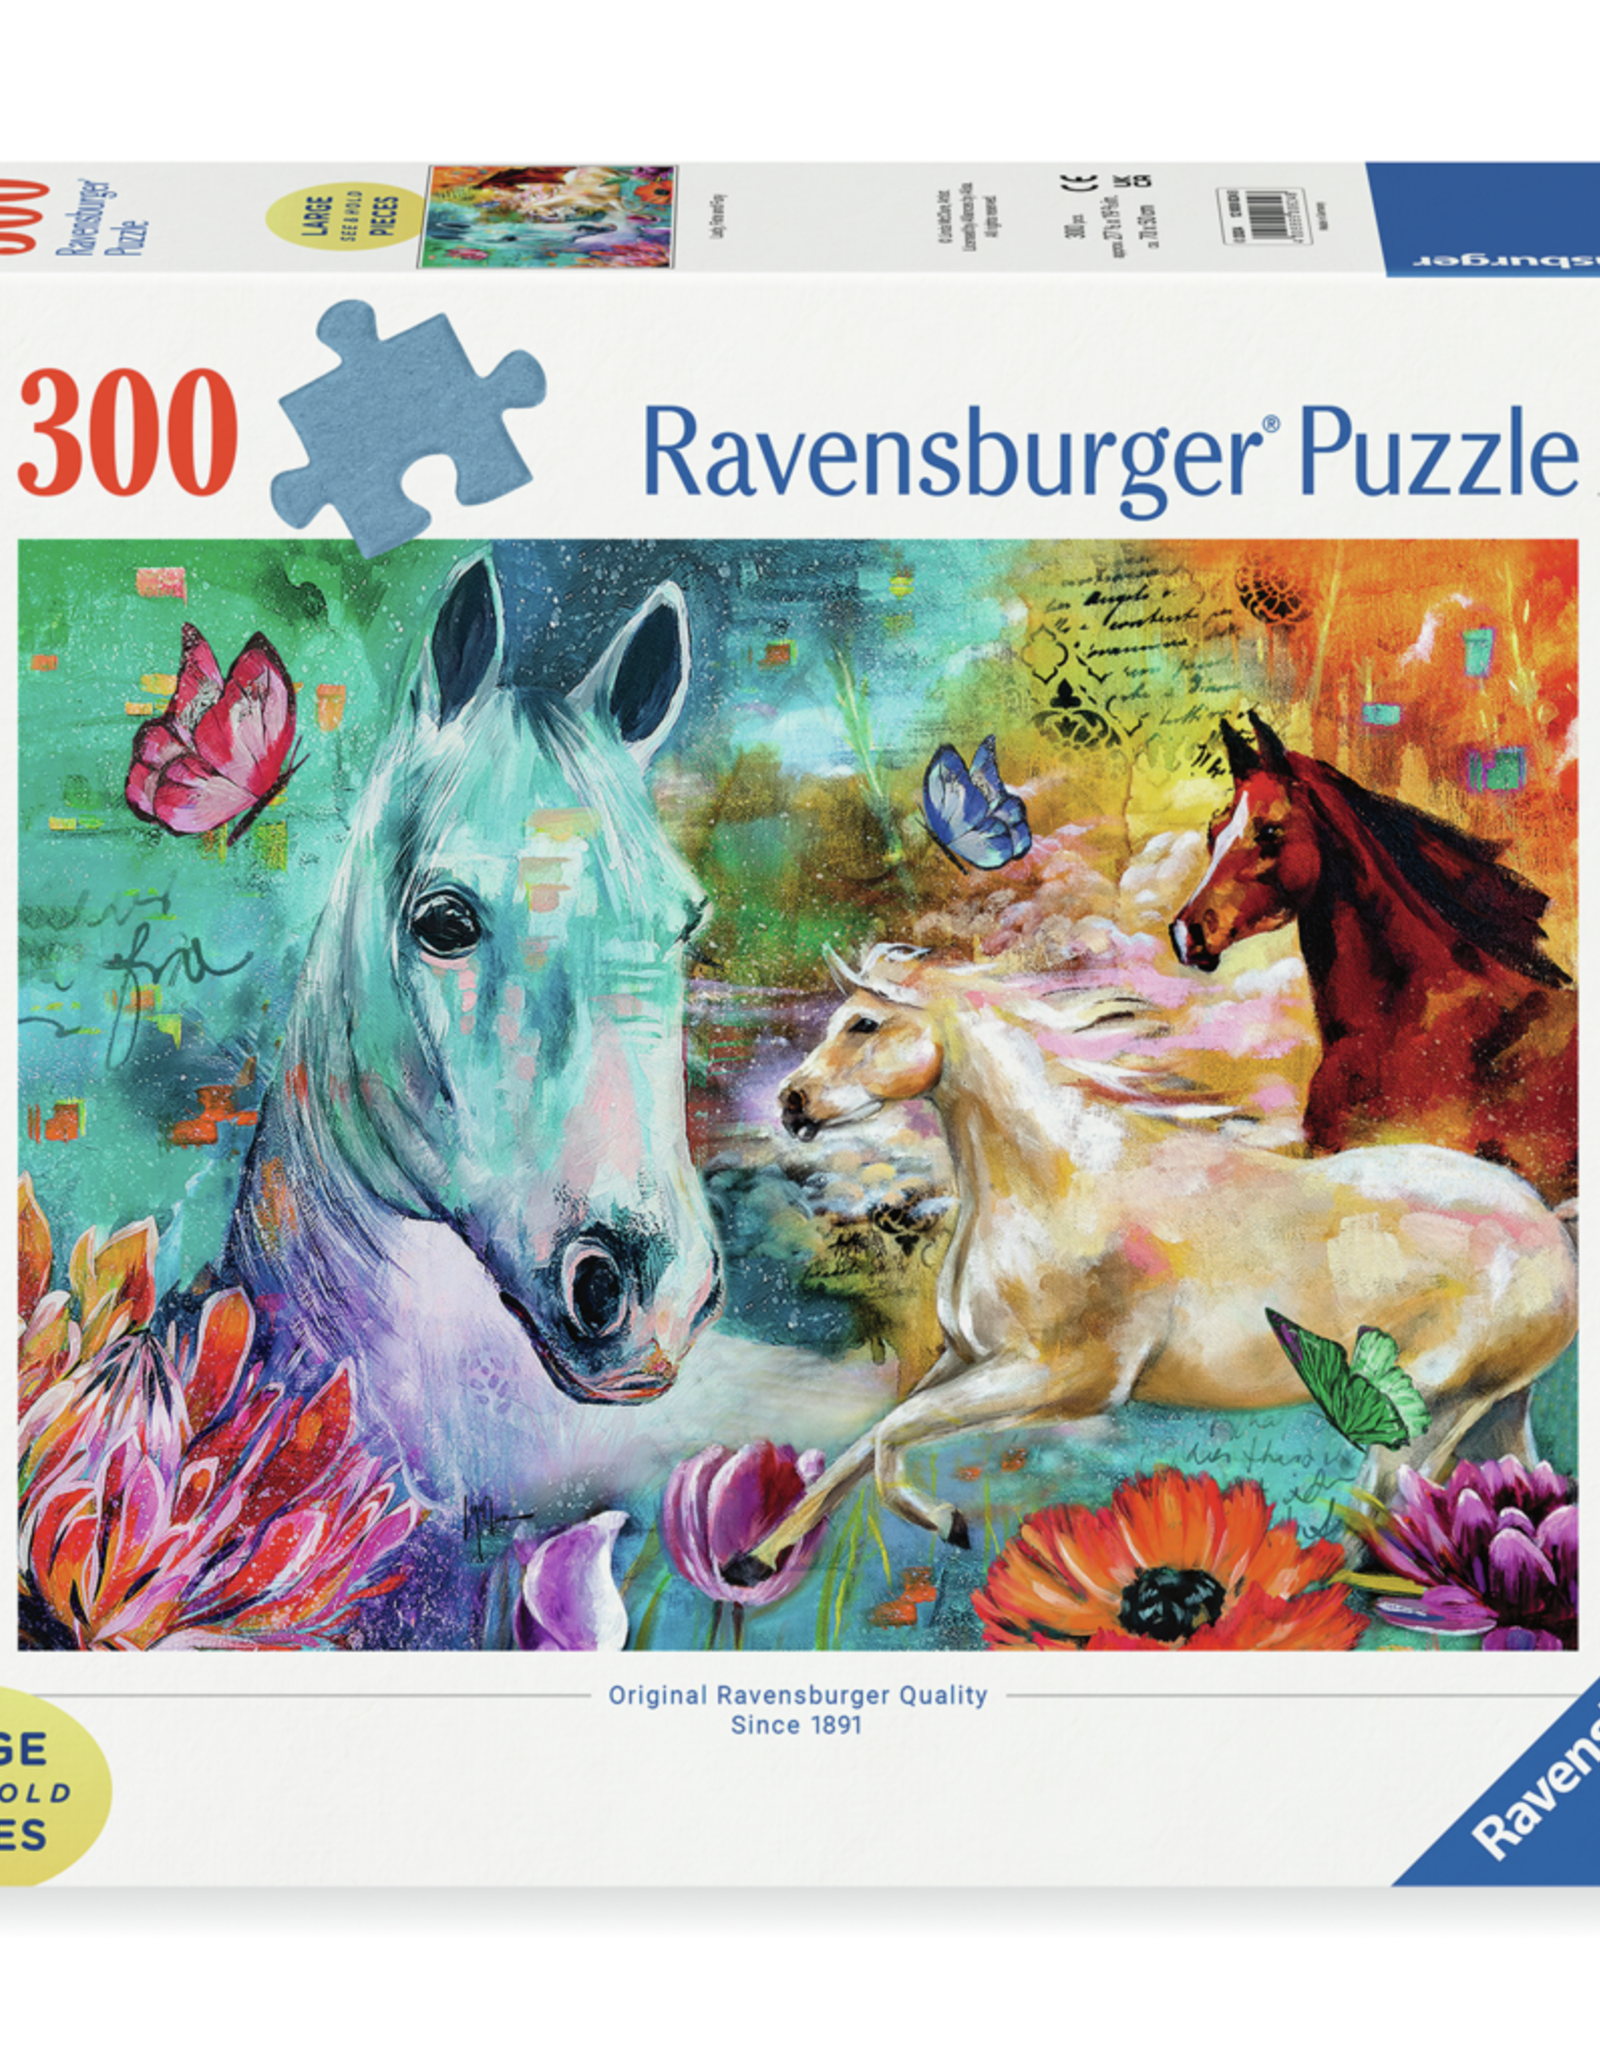 Ravensburger Lady, Fate and Fury 300 pc Large Format